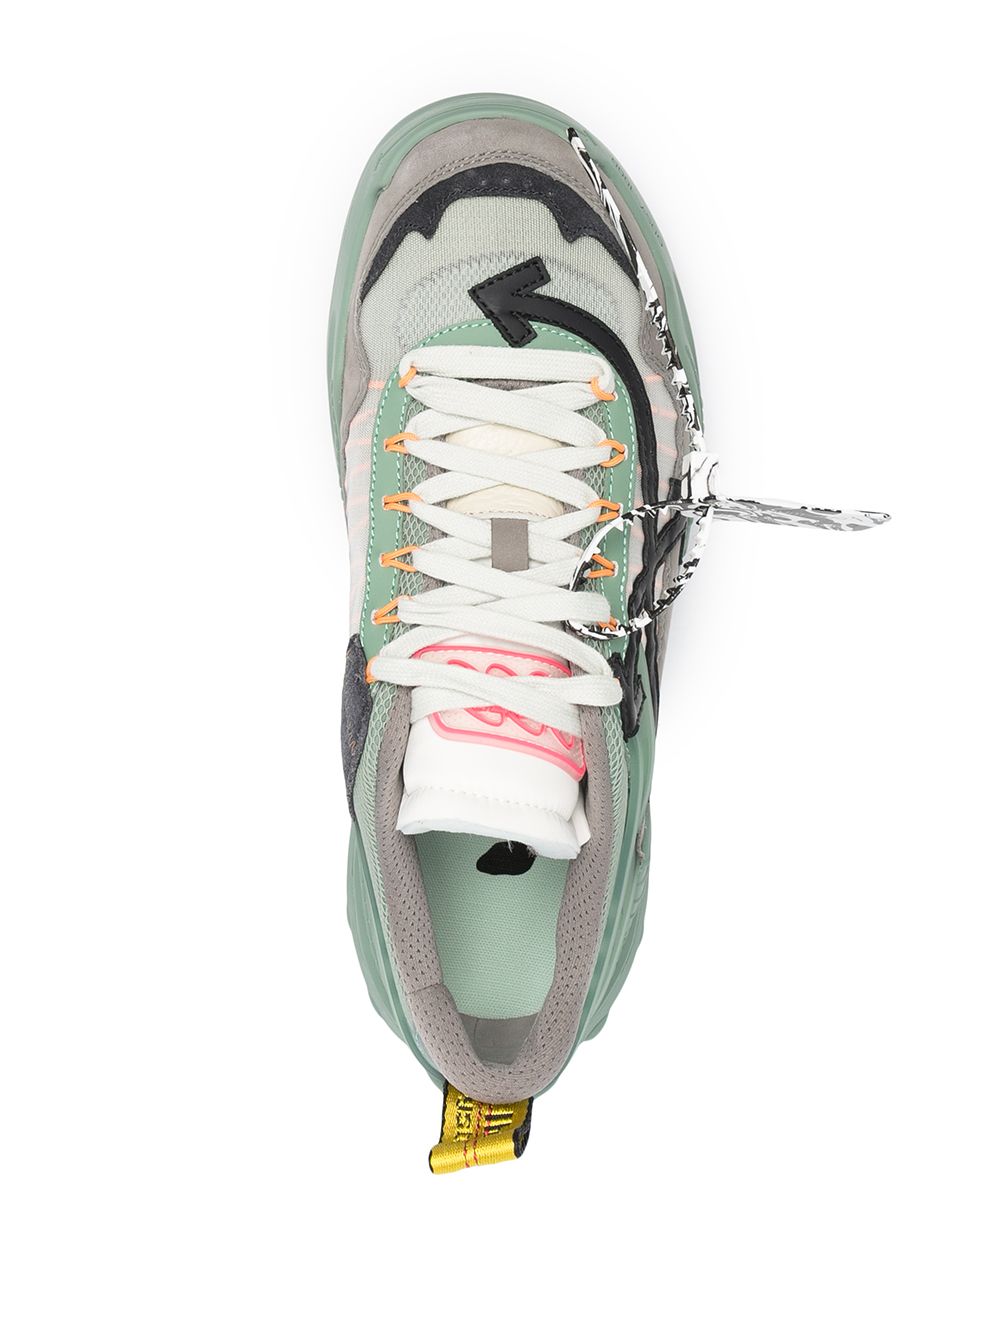 OFF-WHITE - SNEAKERS ODSY 1000